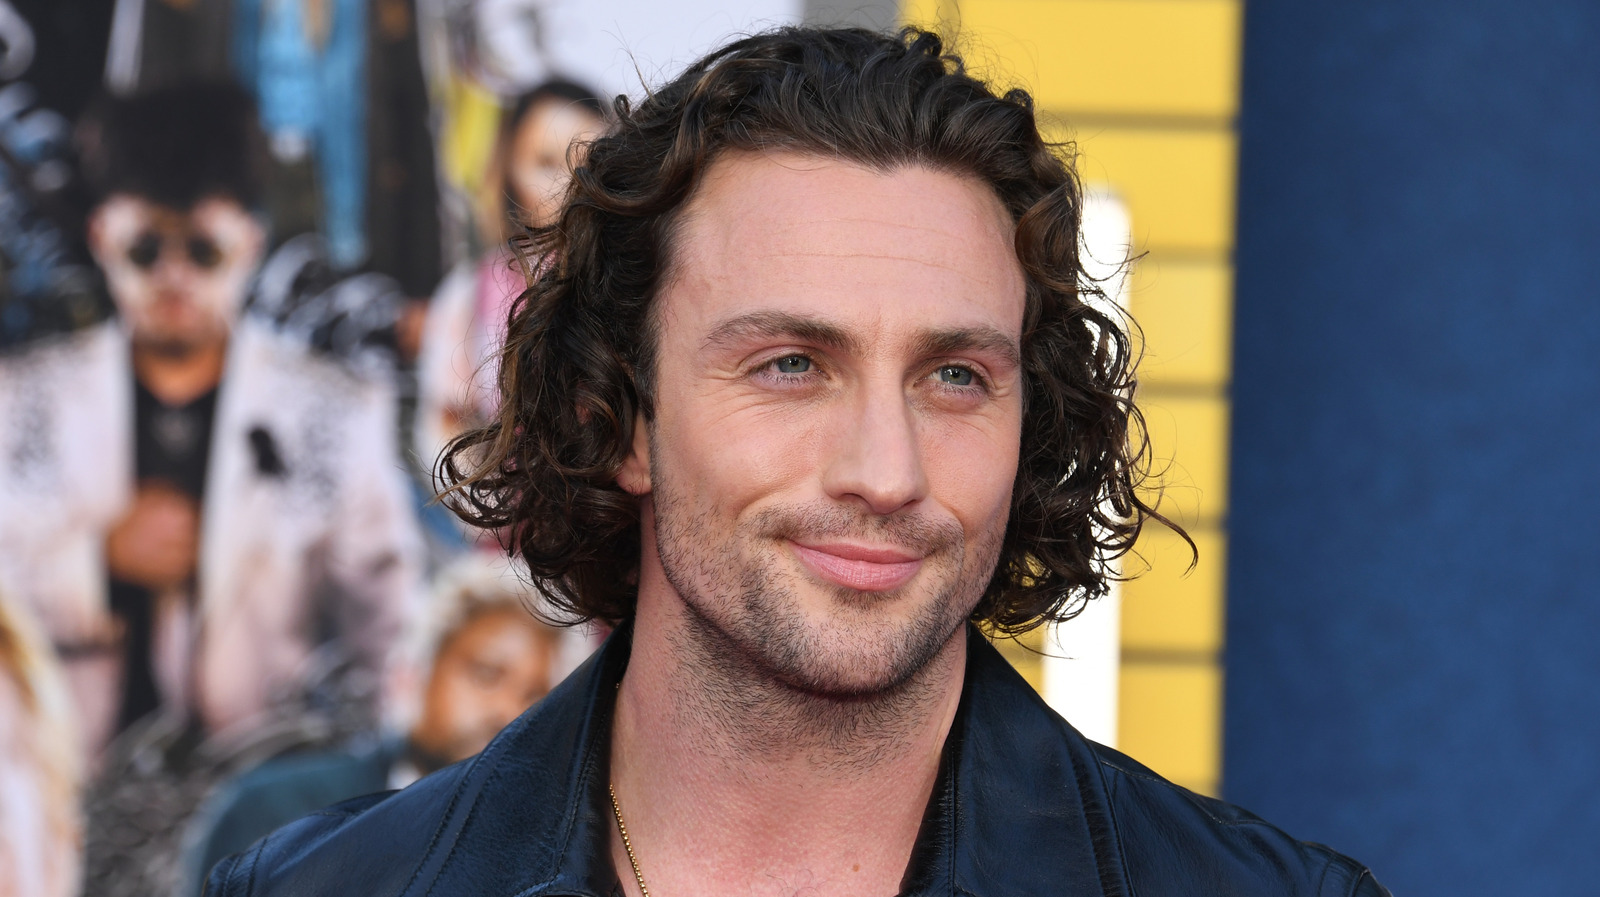 Aaron Taylor-Johnson's Life In The Spotlight And Why His Marriage Is So Divisive